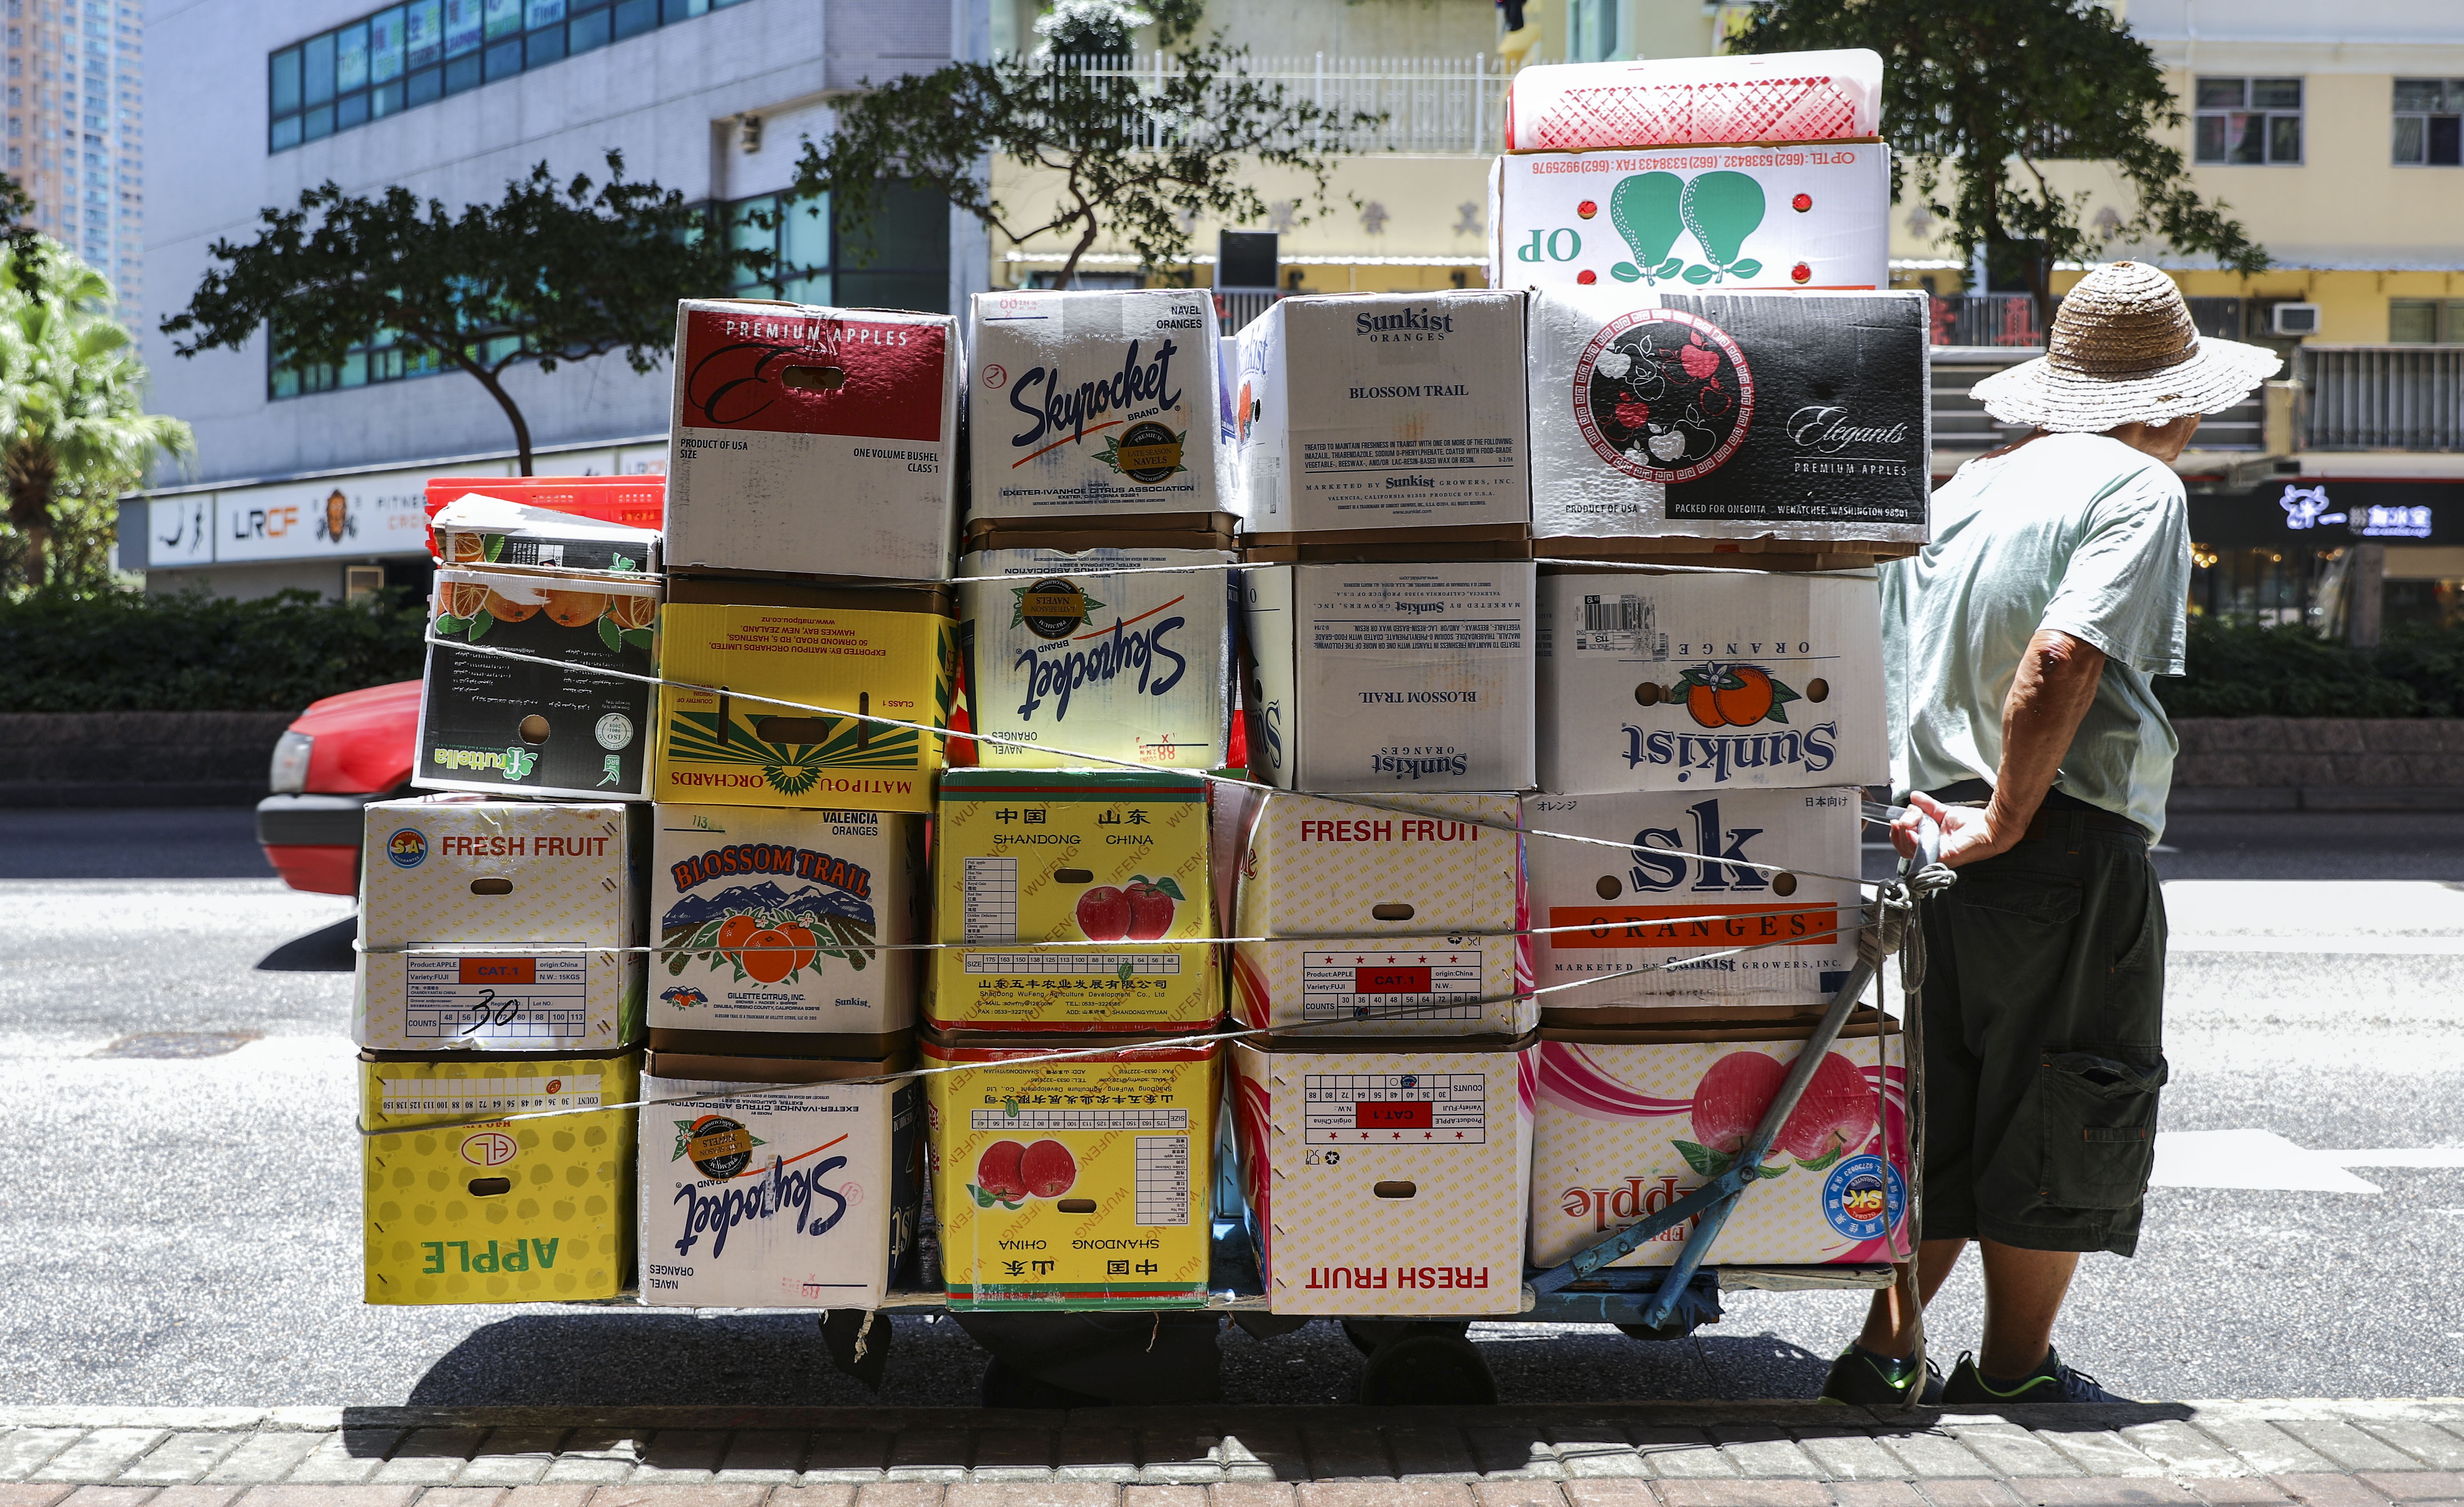 Elderly people collecting cardboard or pulling heavy trolleys has become a common sight in Hong Kong, as some of the city’s older adults struggle to afford daily necessities. Photo: Sam Tsang